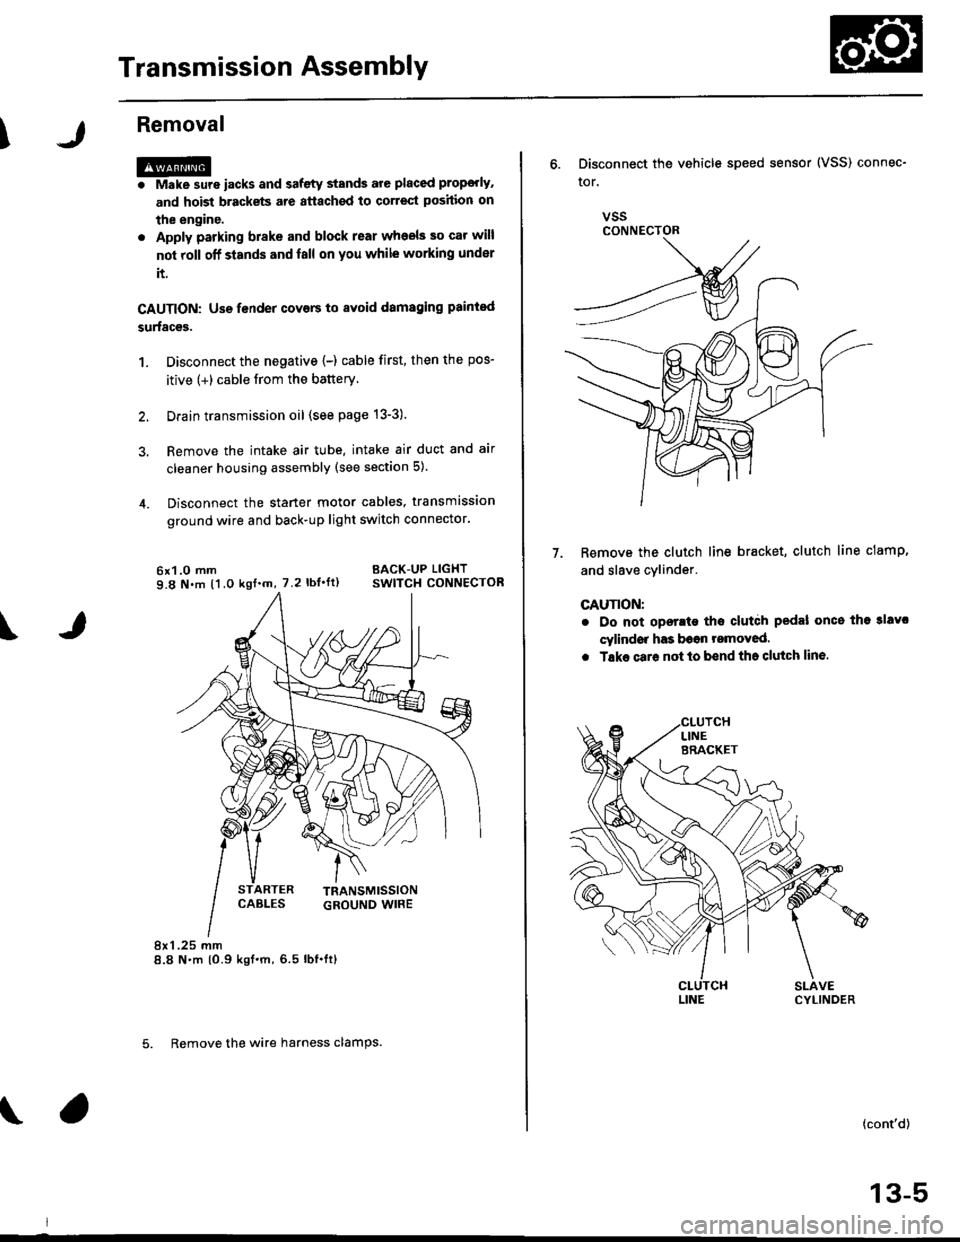 HONDA CIVIC 1996 6.G User Guide Transmission Assembly
I
Removal
@. Make sure iacks and safety stands are placed prop€dy,
and hoist brackets are atlach€d to correct position on
the enginc.
. Apply parking brake and block rear who